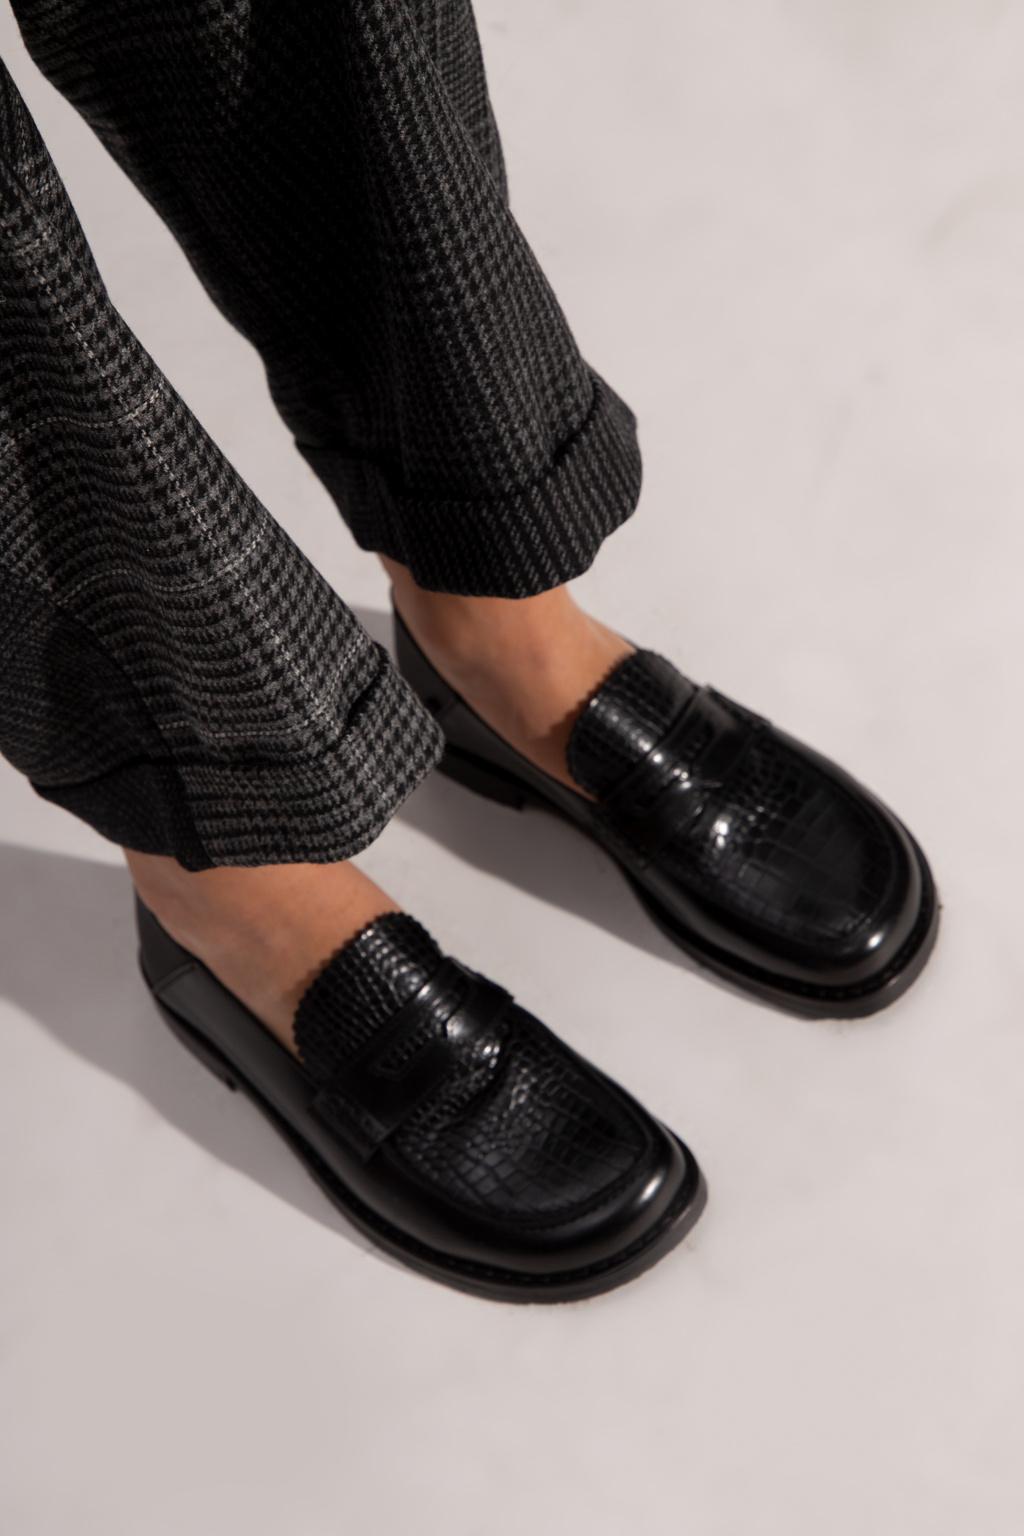 Eytys 'otello' Loafers in Black | Lyst